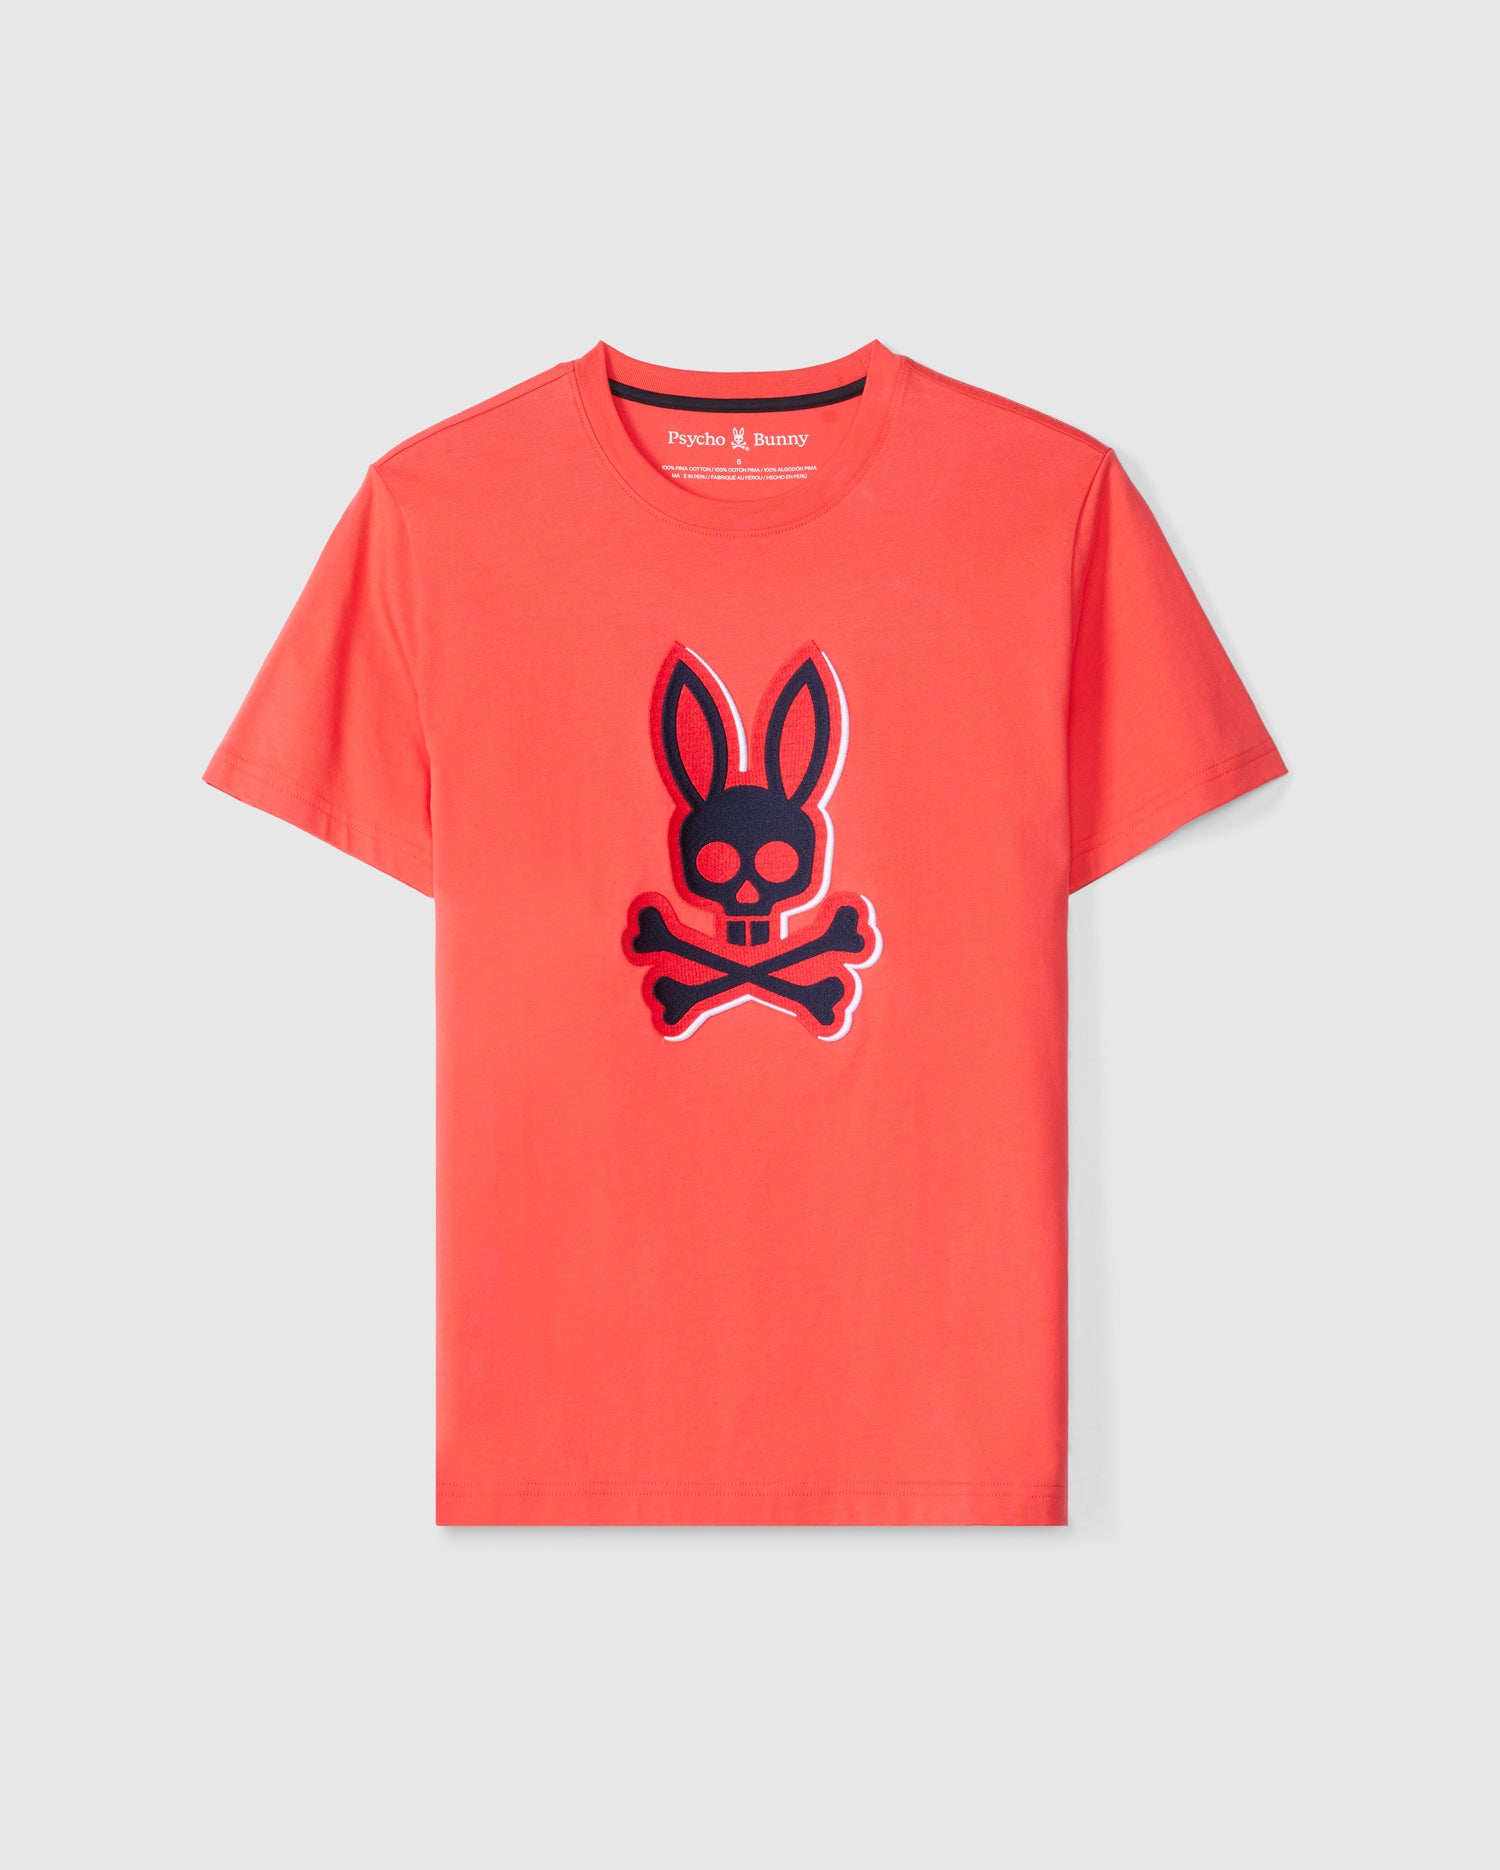 A bright red short-sleeve graphic tee featuring a bunny's head with crossbones below it in black and white with red accents, the MENS KAYDEN GRAPHIC TEE - B6U676C200. Made from soft Pima cotton, the T-shirt also has the brand name 